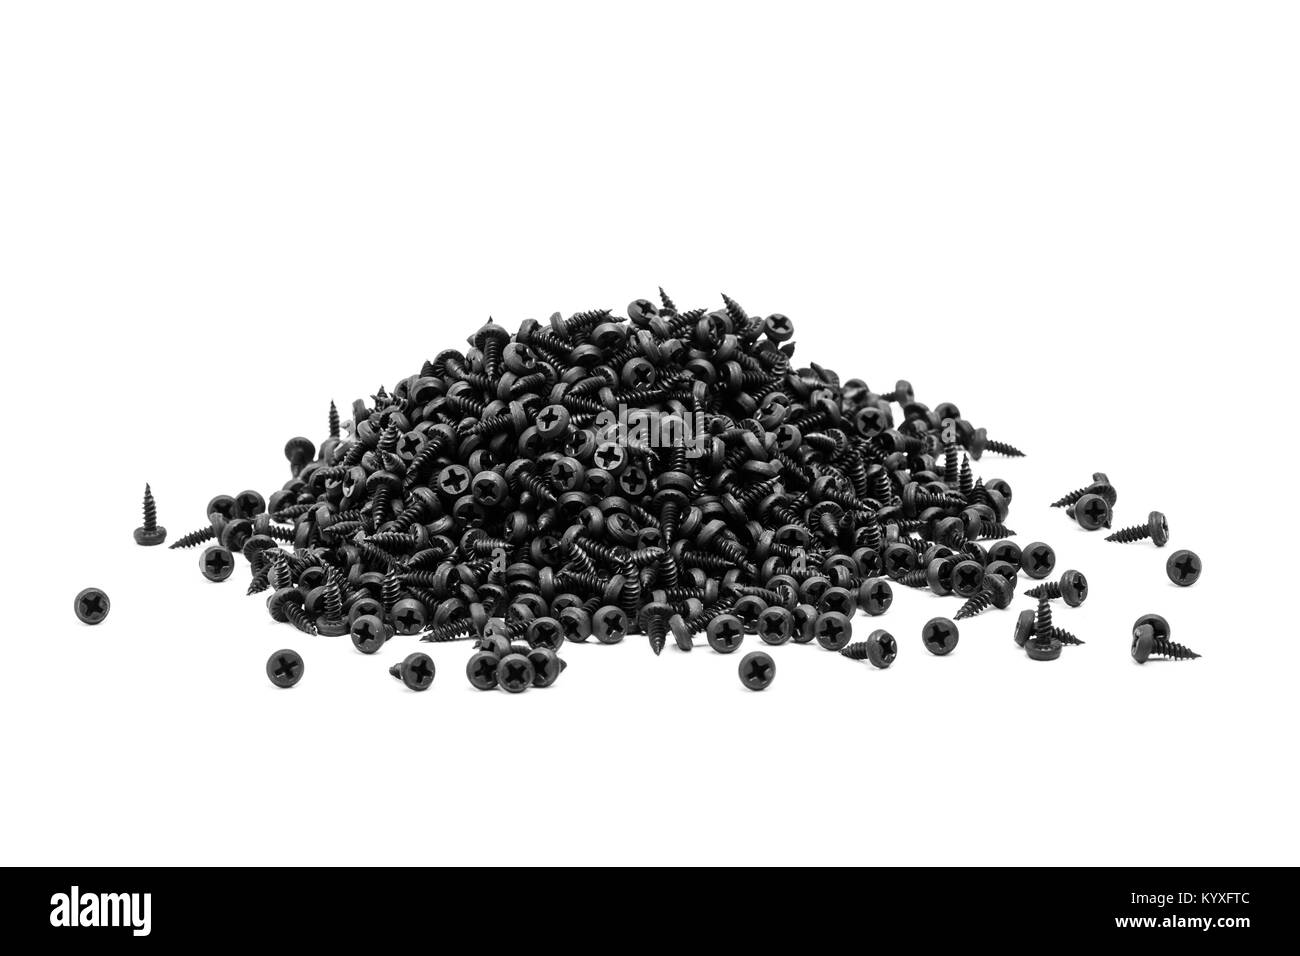 group of black screws for fixing metal profiles Stock Photo